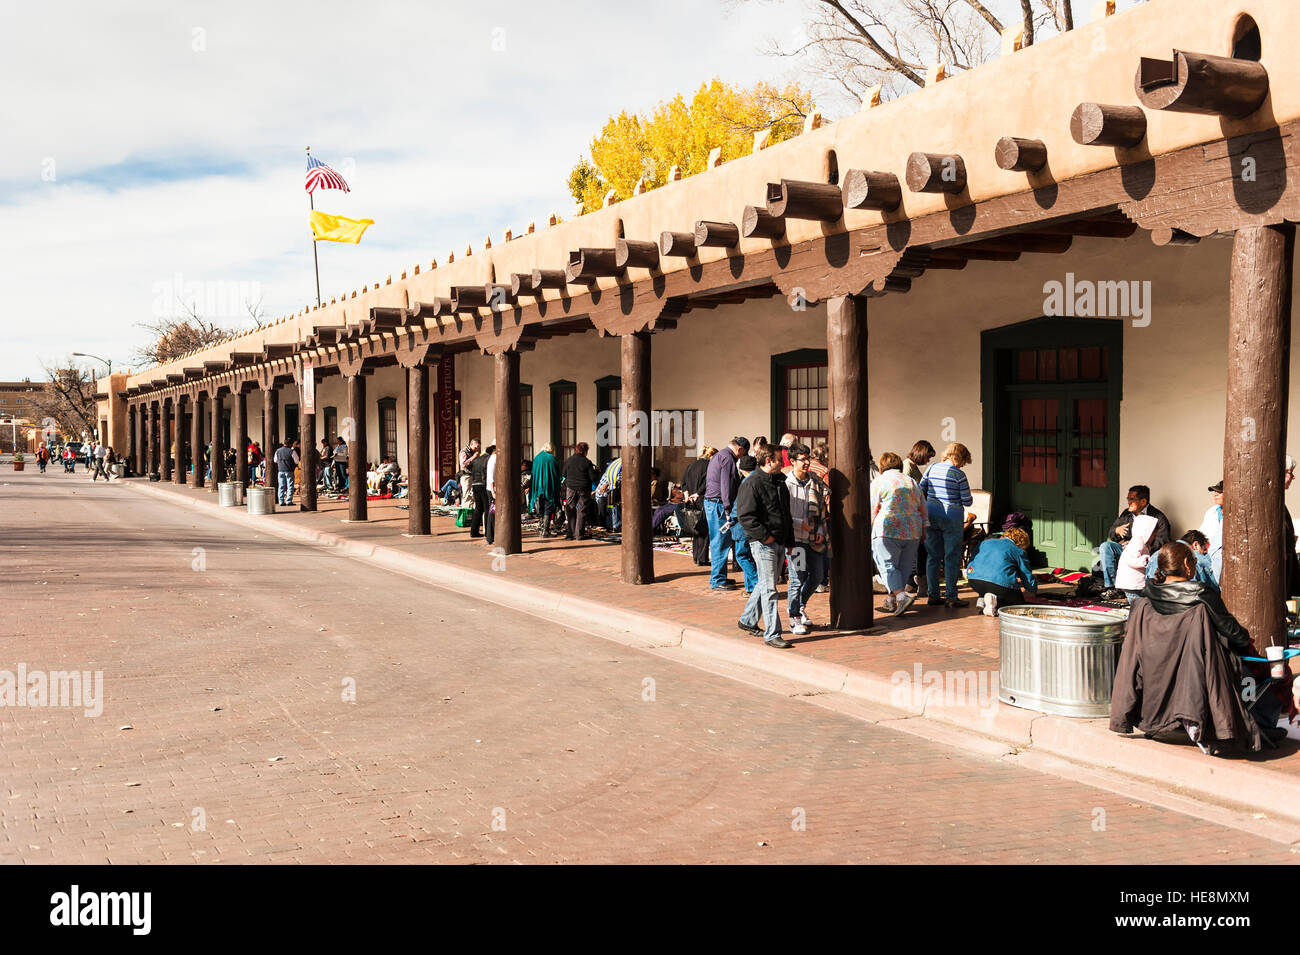 Street vendors and tourists in the Palace of the Governors on the Plaza of Santa Fe, New Mexico. Stock Photo